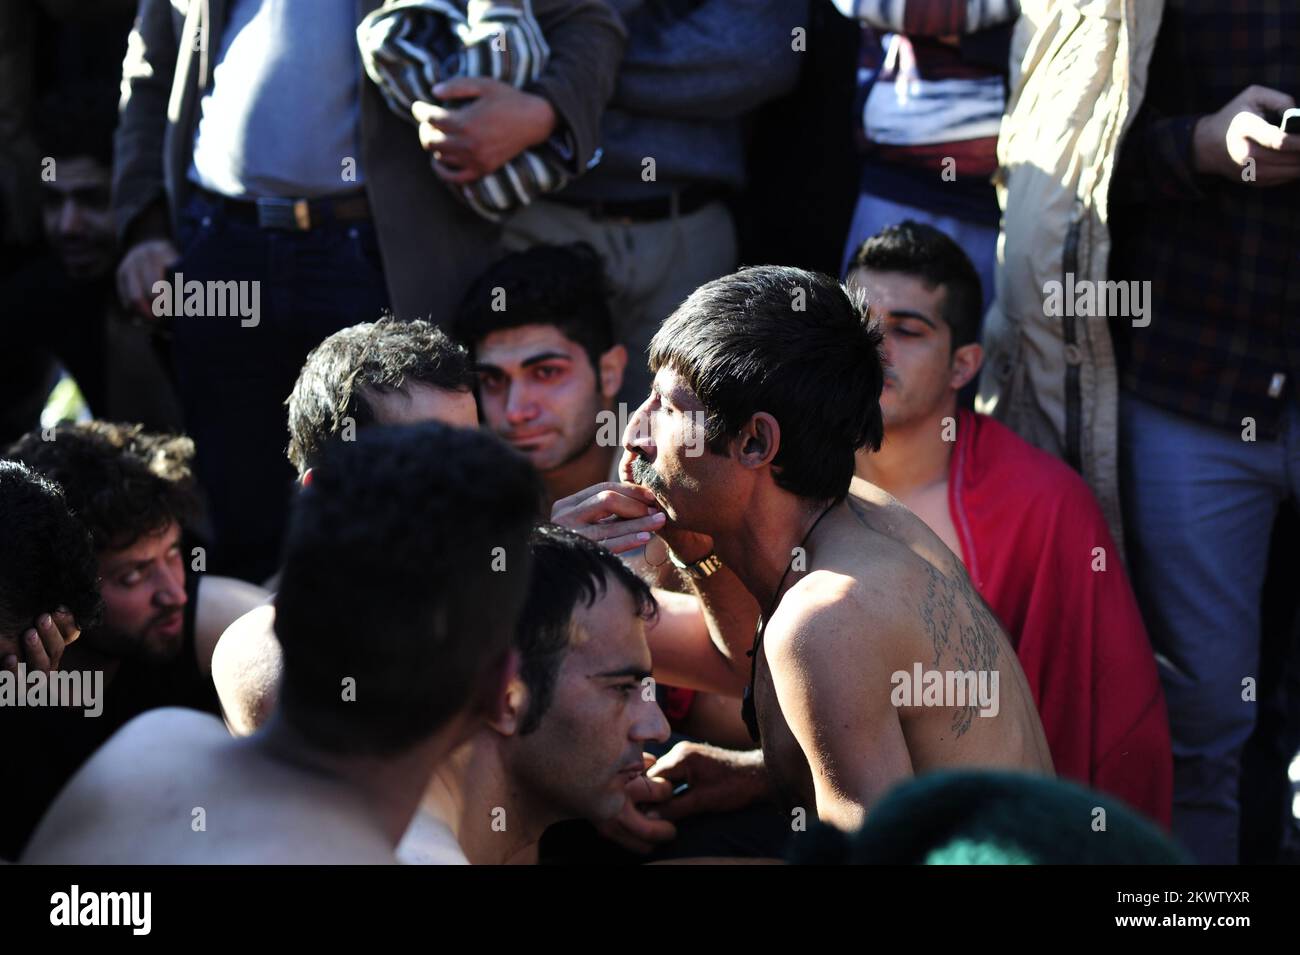 23.11.2015., Gevgelija, Macedonia - Migrants have blocked rail traffic at the Macedonian border as they protested against a decision to only allow Syrians, Afghans and Iraqis to cross there from Greece. Several sewed their lips together with cord, with at least one declaring a hunger strike before sitting down in front of lines of Macedonian riot police. Photo: HaloPix/PIXSELL Stock Photo